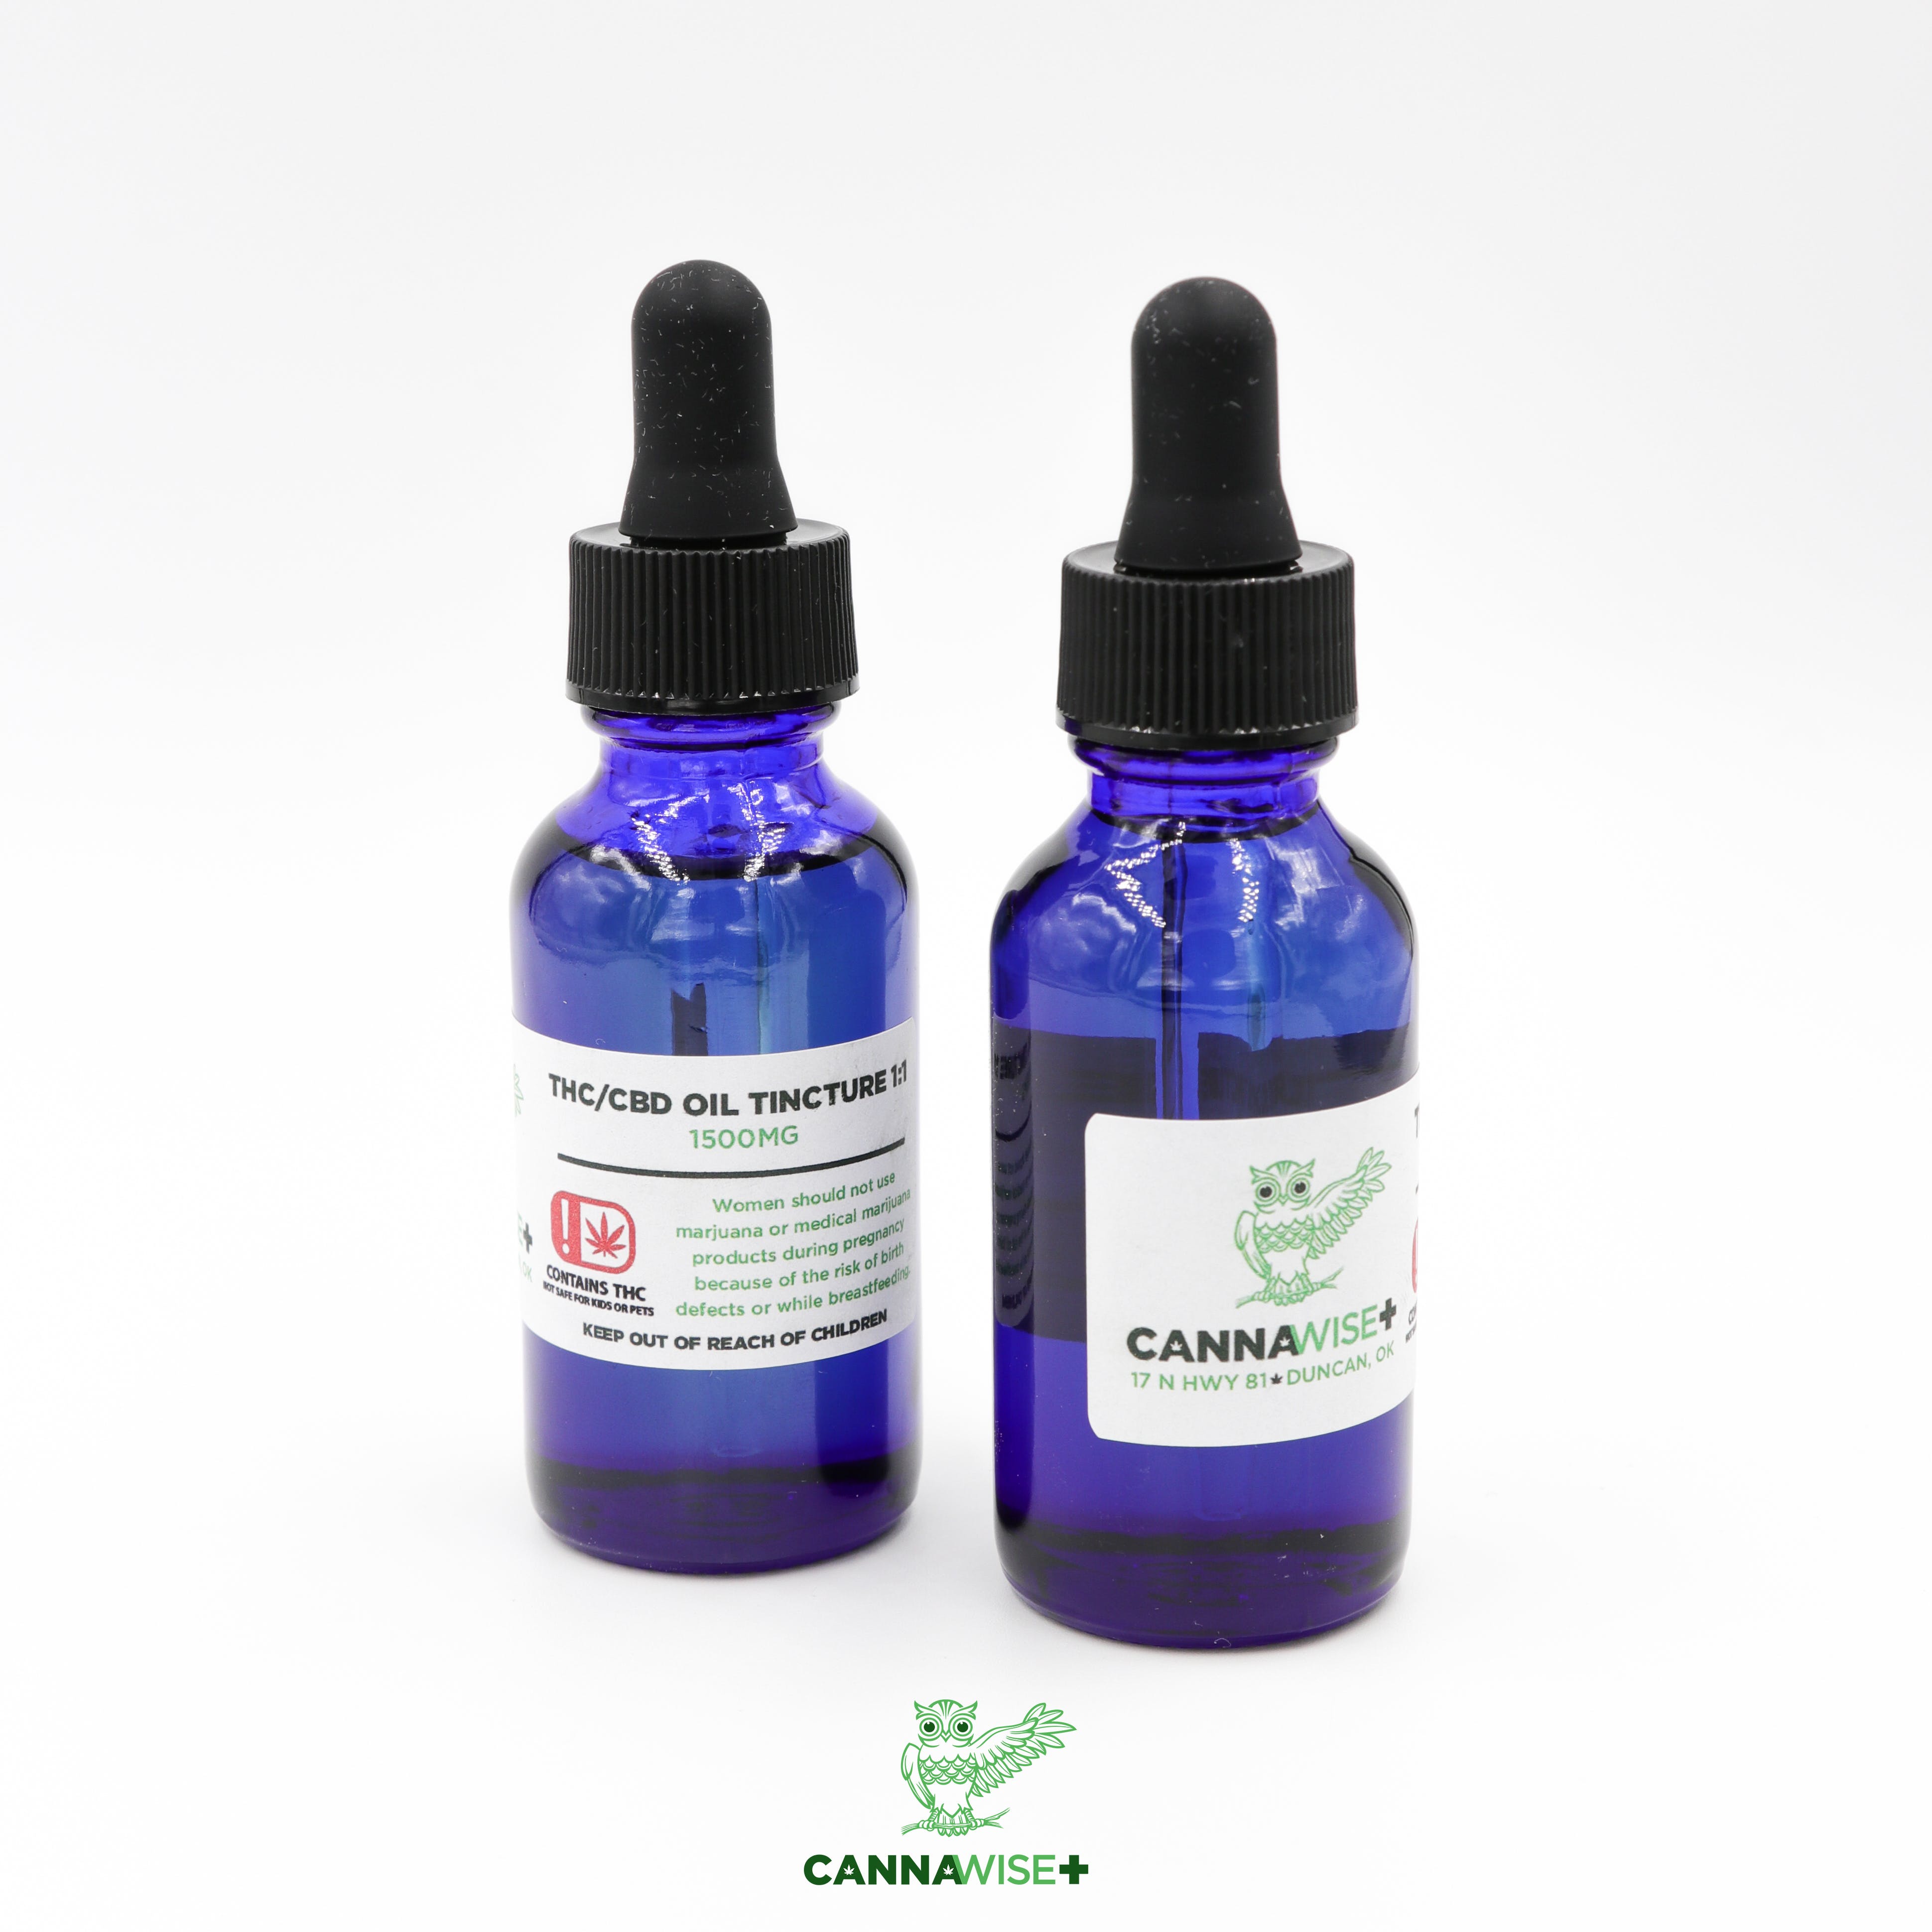 tincture-cannawise-oil-tincture-1-2c500mg